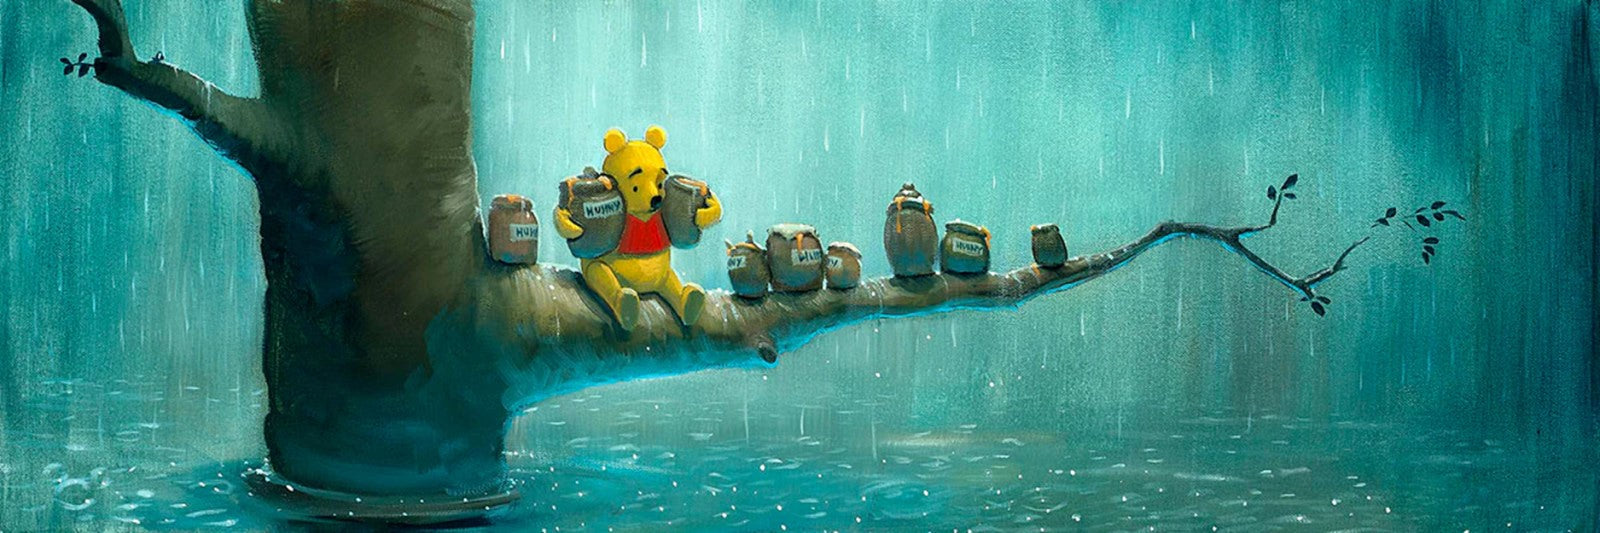 Waiting Out the Rain by Rob Kaz inspired by Winnie the Pooh